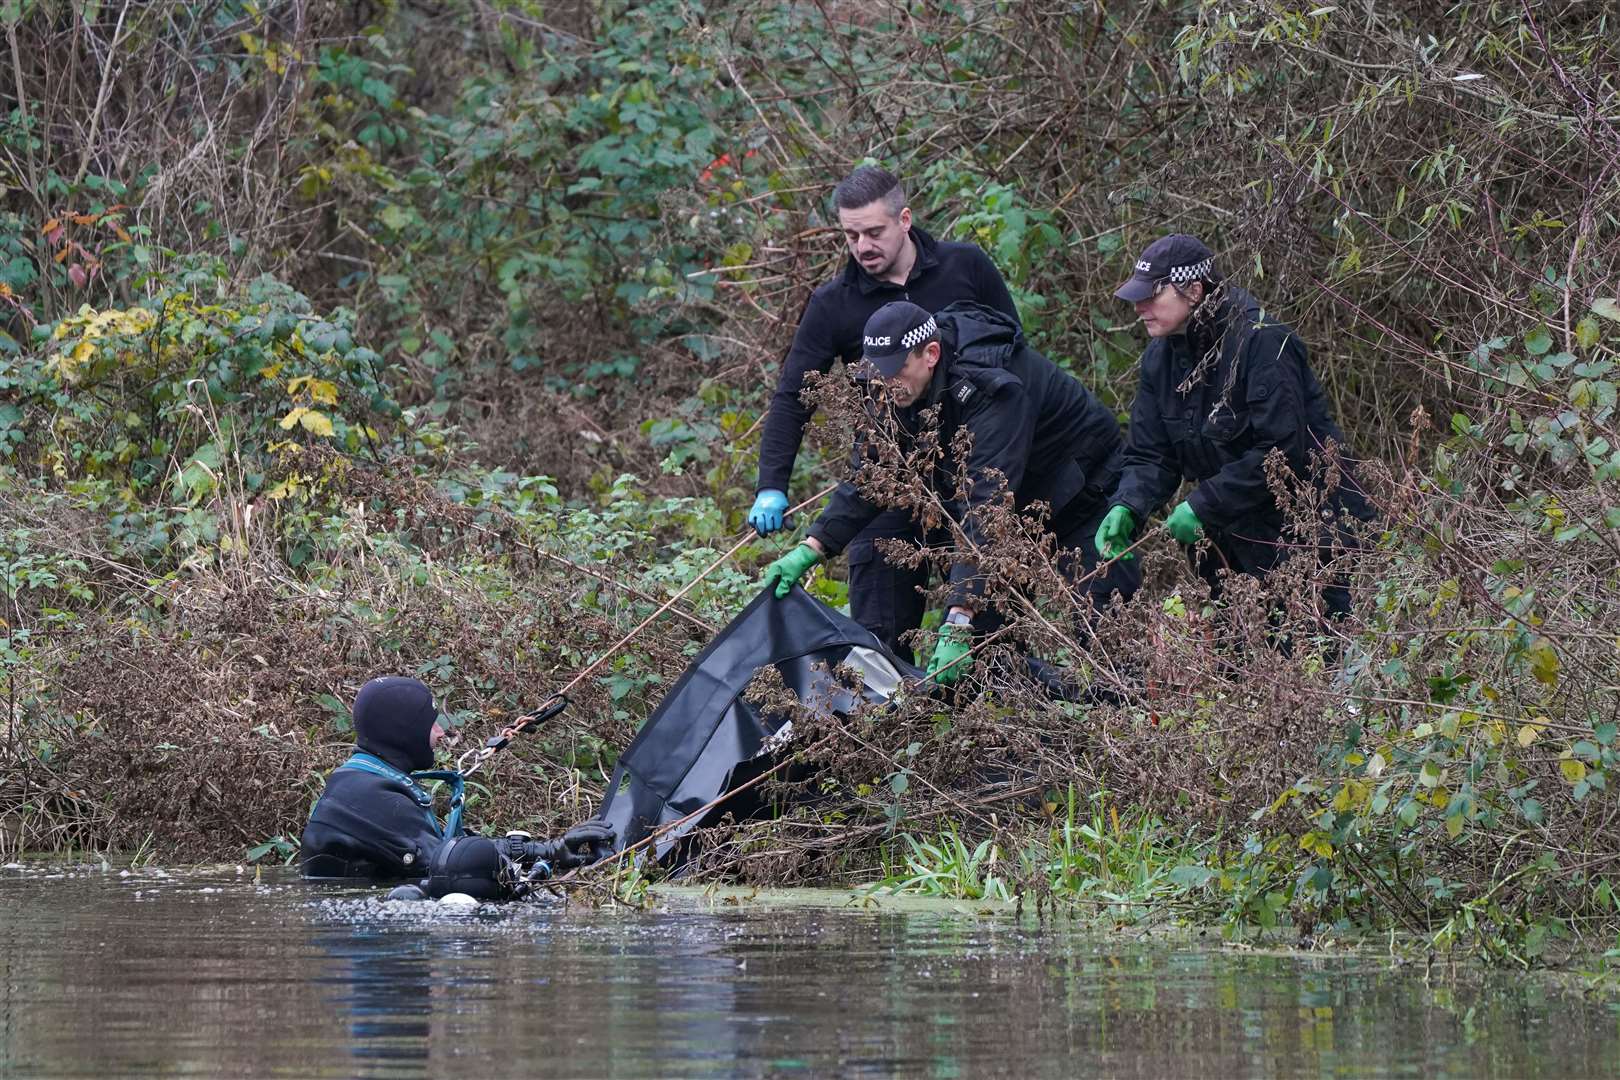 Police search teams pull a black bag from the River Wensum during the search for the missing mother-of-three (Joe Giddens/PA)